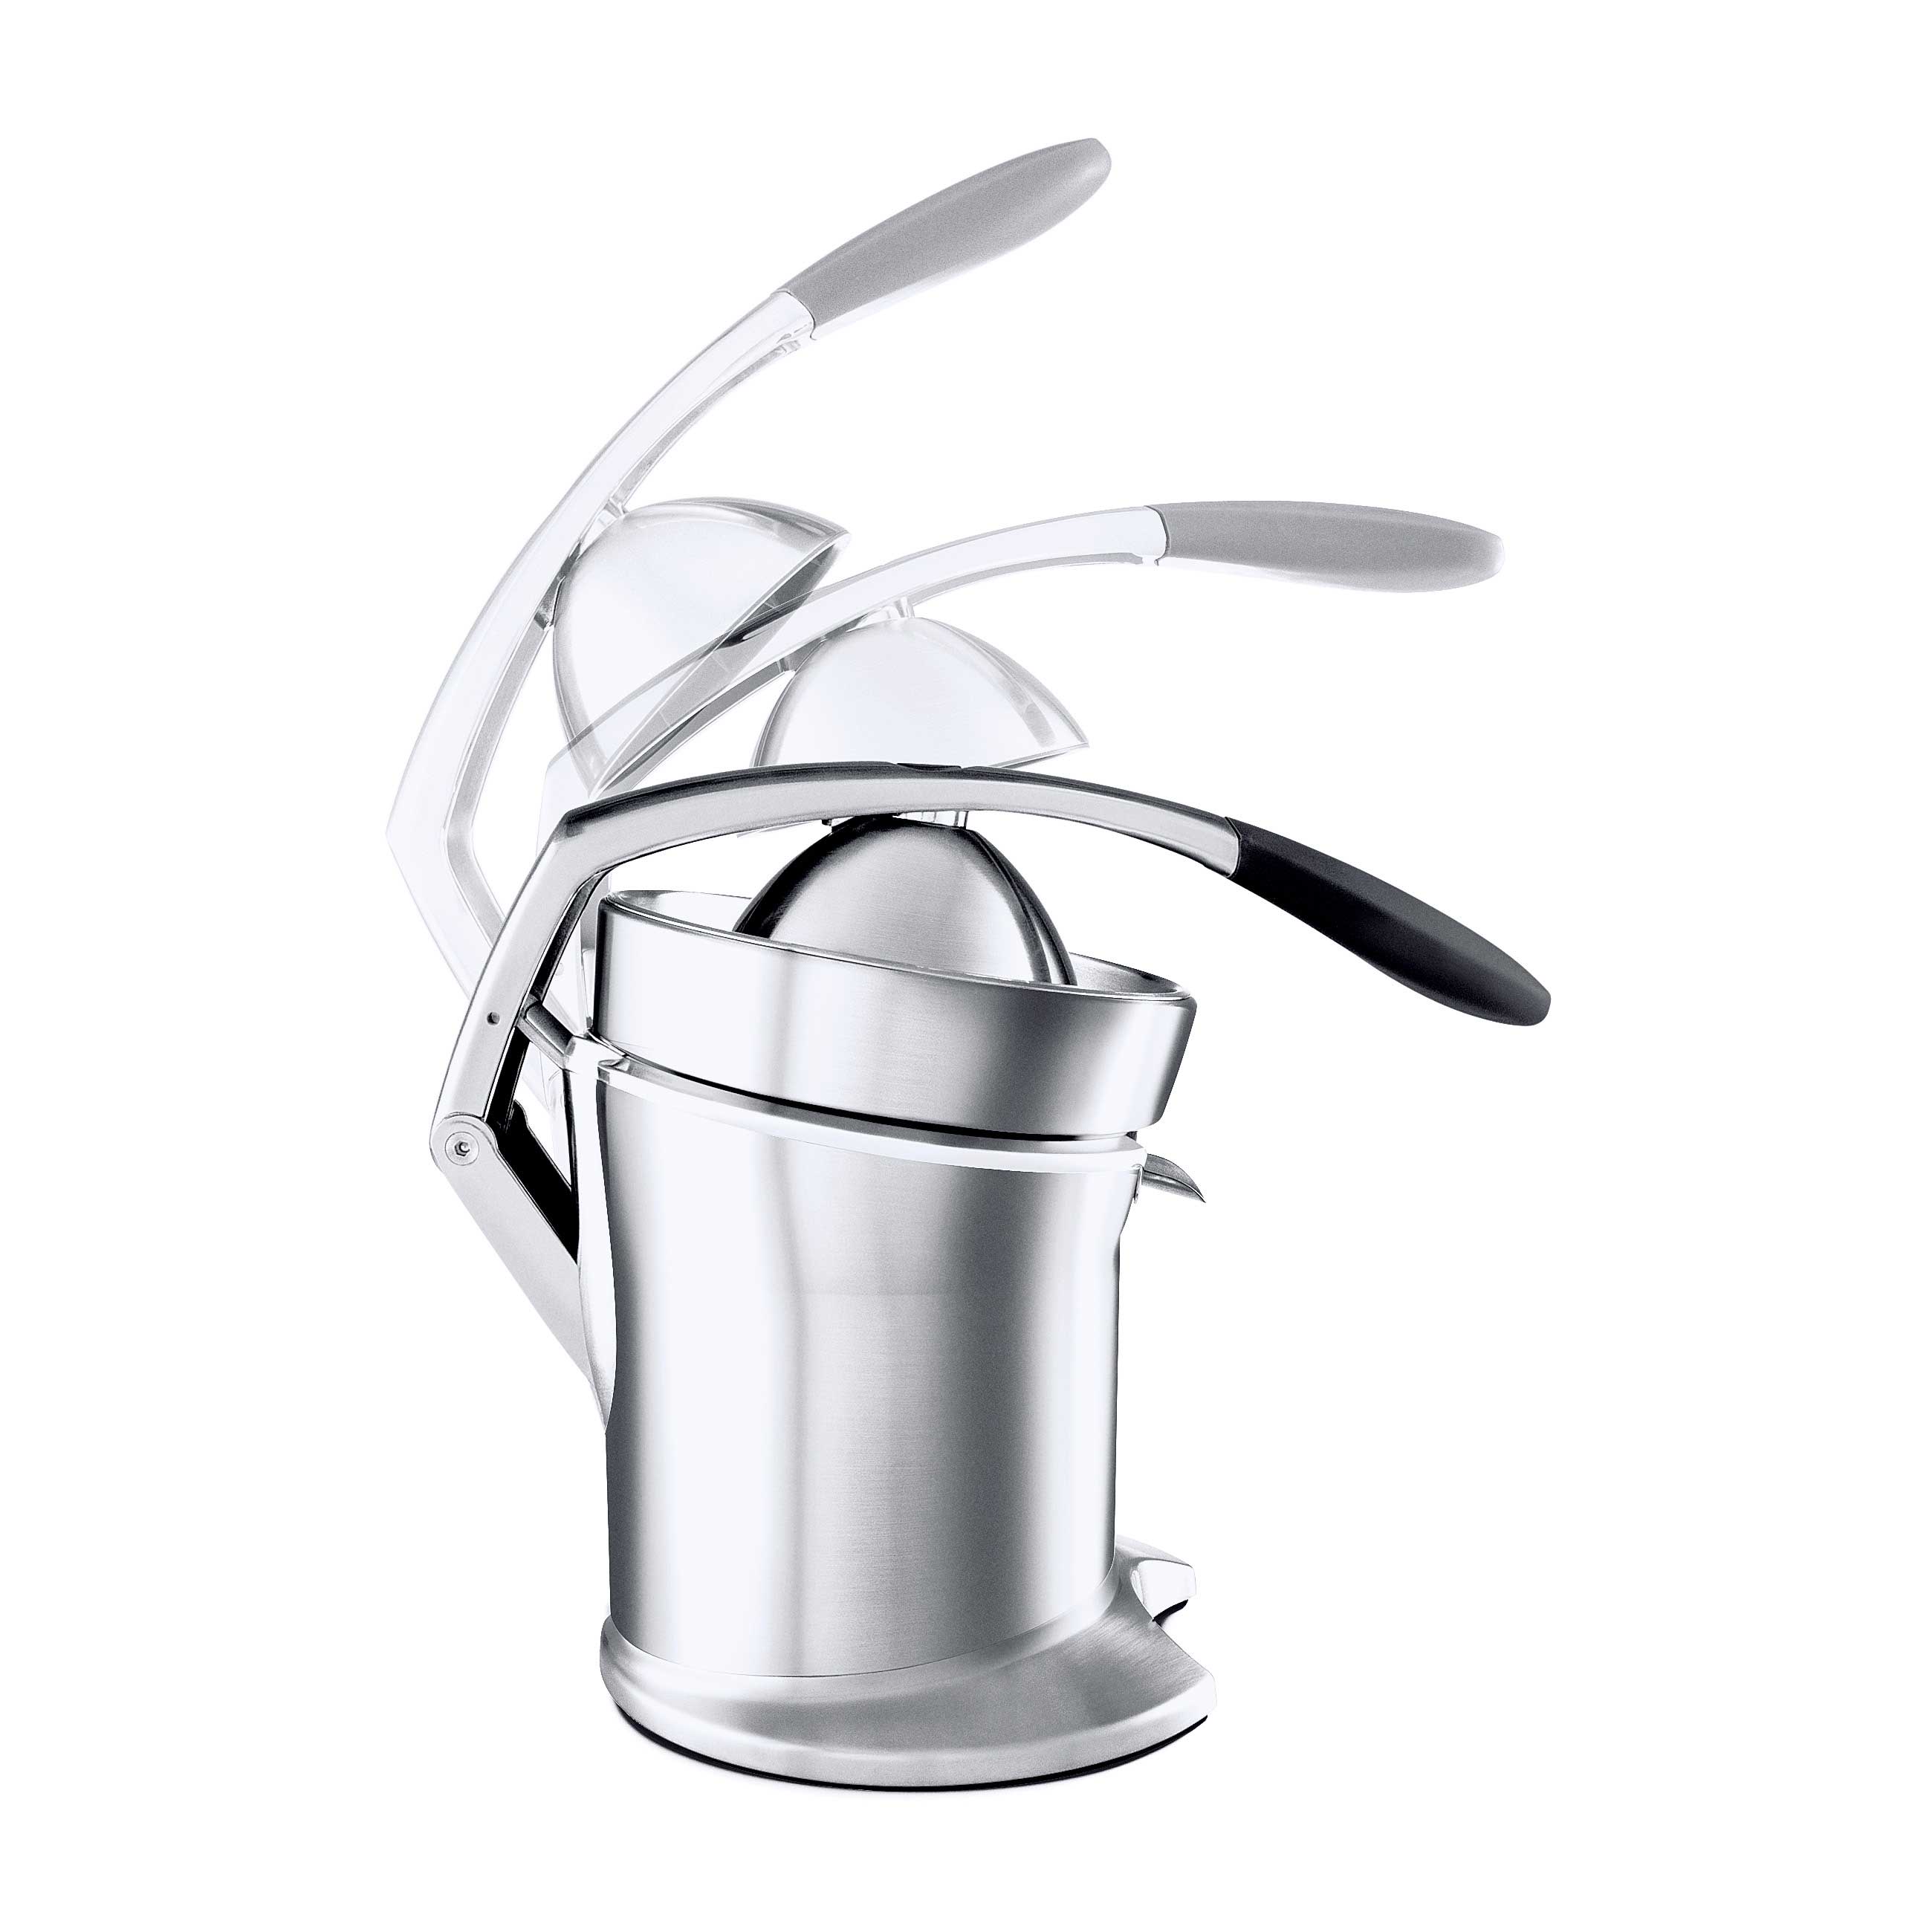  the Citrus Press™ Pro Juicers in Silver juice press arm with dual-switch